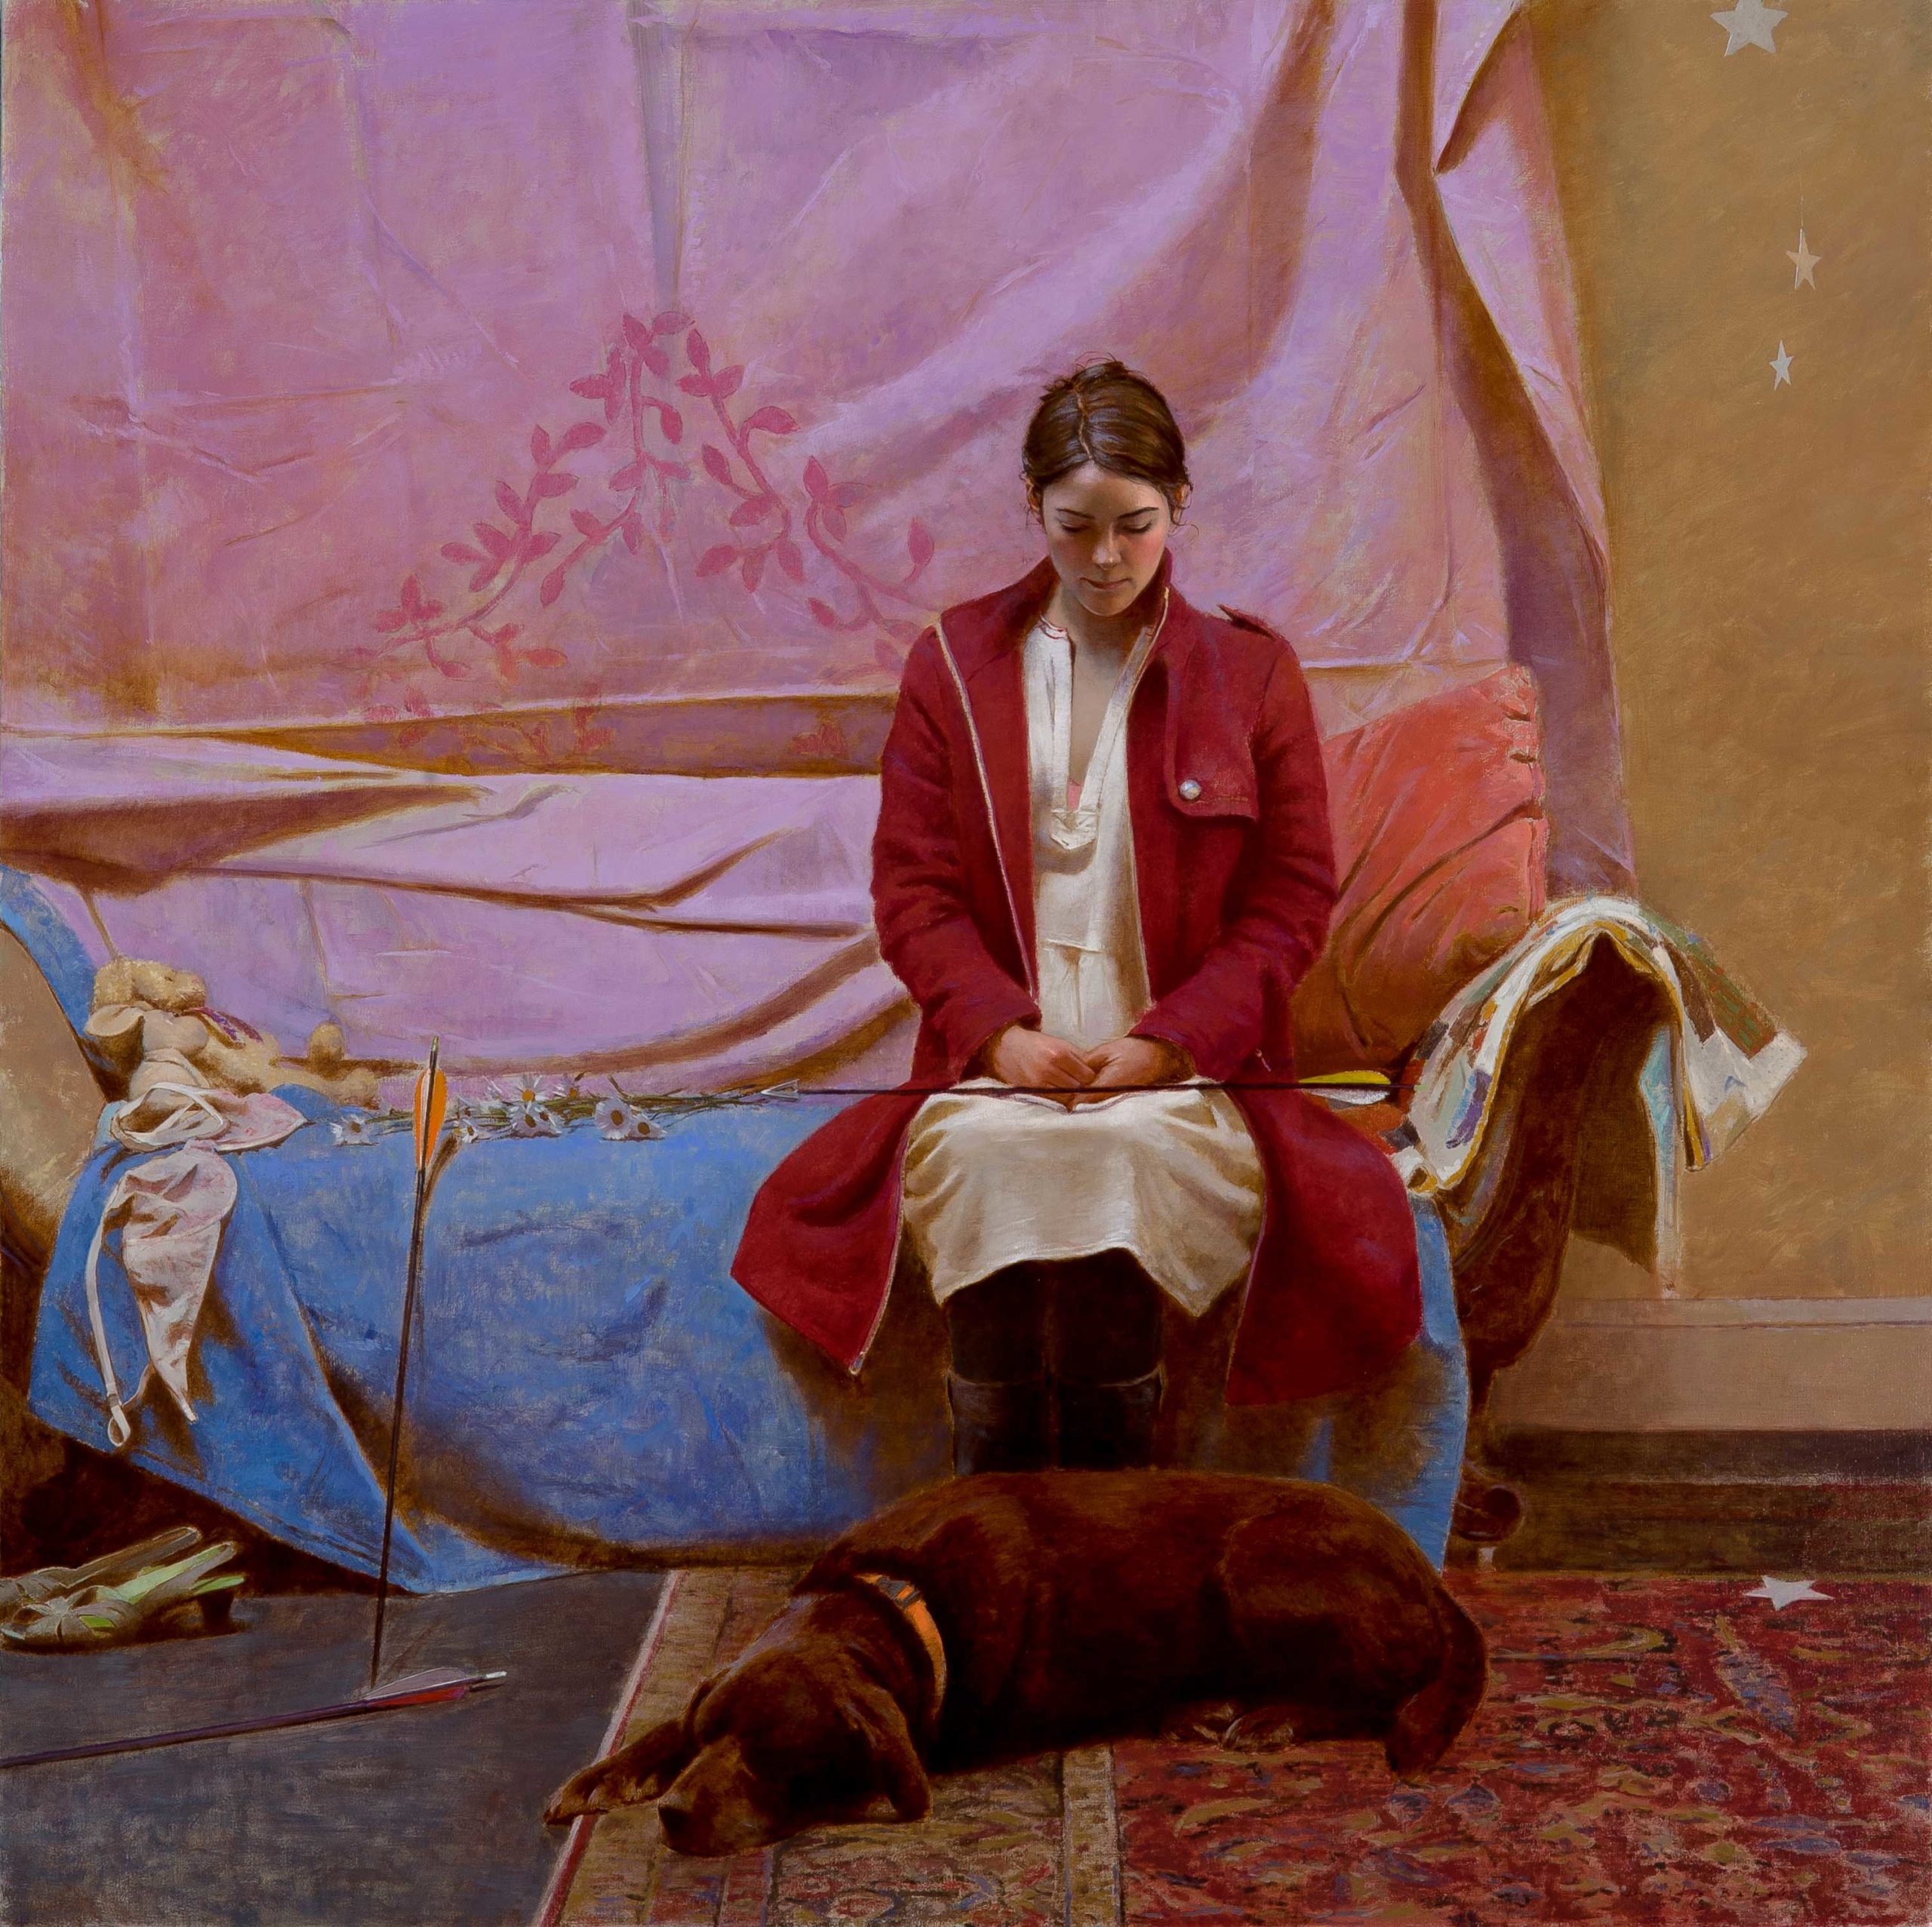 Narrative art realist painting - David Baker, "Hunters and Rabbits," 36 x 36 inches, Oil on linen